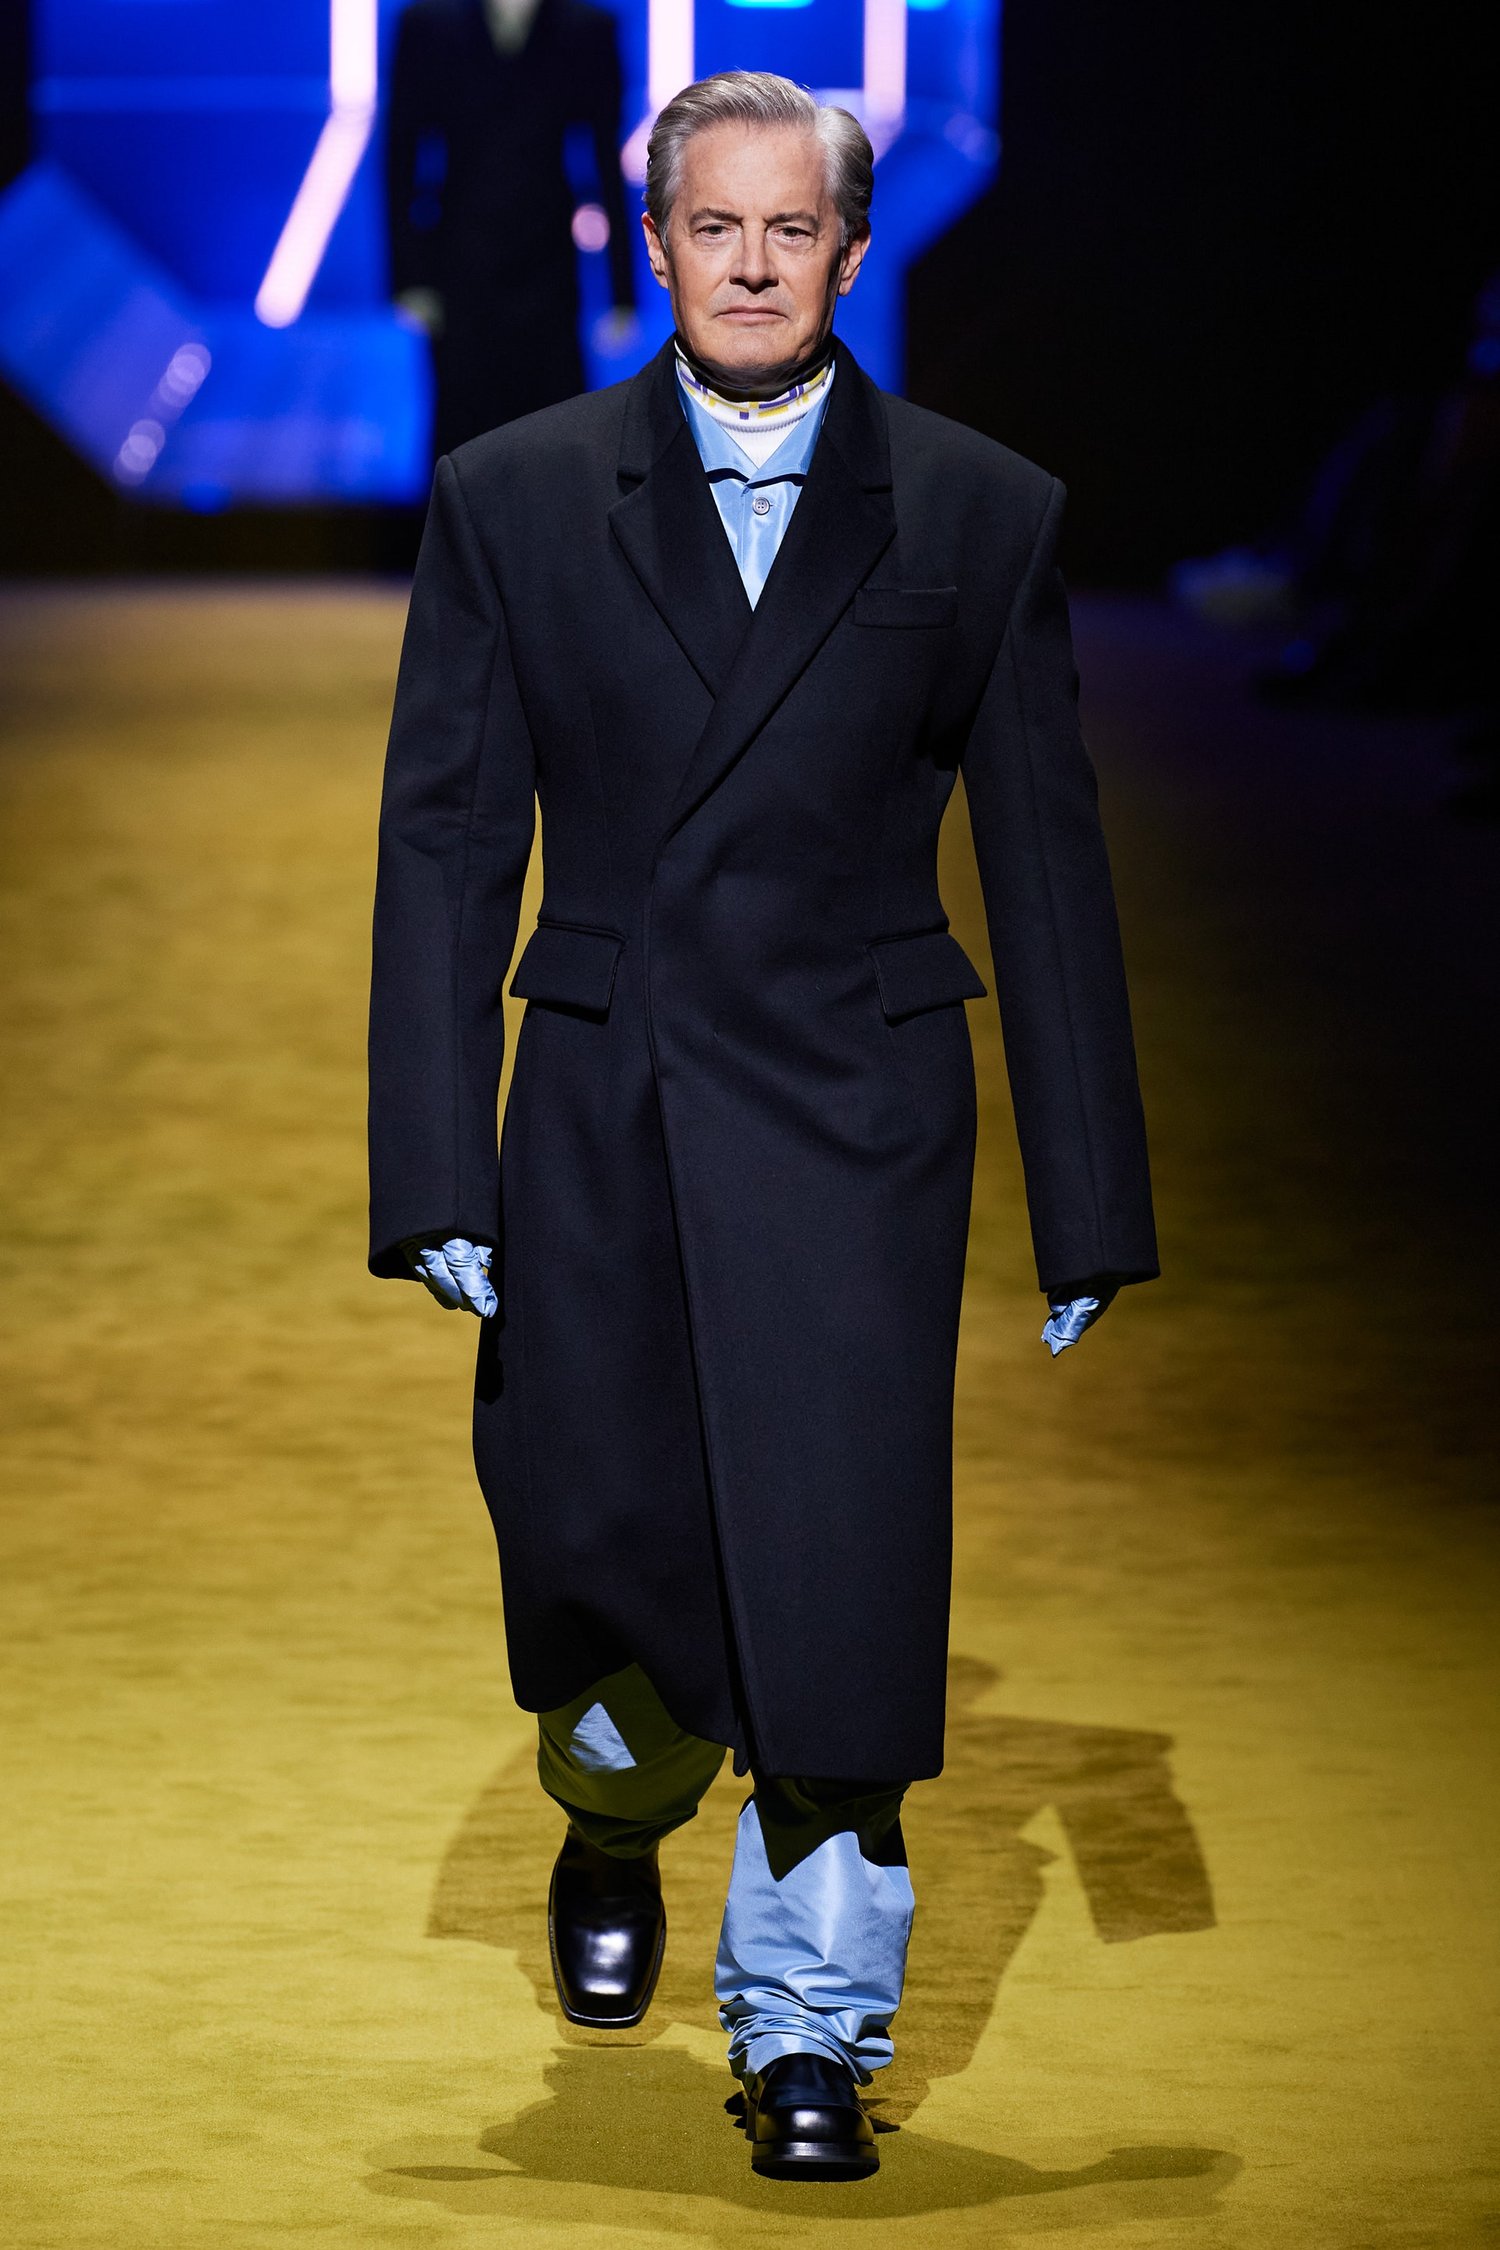 Martine Rose FW22 Presents Work From Home Tailoring